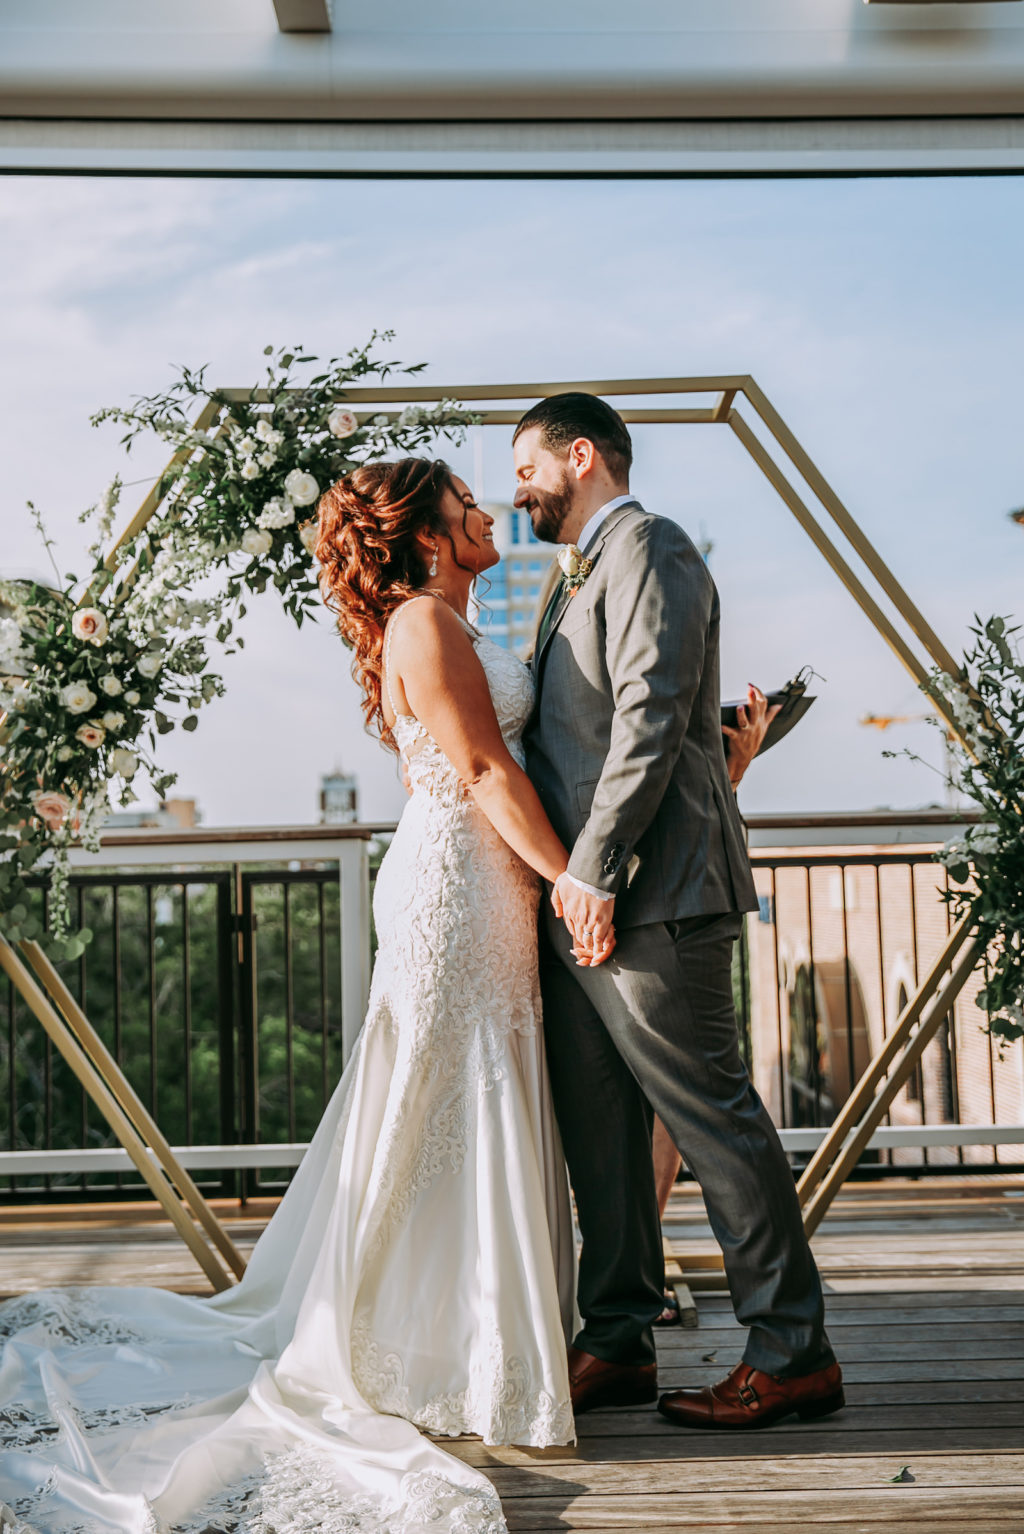 Bride and Groom Exchanging Vows During Outdoor Rooftop Downtown St. Petersburg Wedding Ceremony | Lace Mermaid Wedding Dress | Charcoal Grey Groom Suit | Geometric Gold Arch Ceremony Backdrop with Natural Rustic Floral Spray of White Roses and Eucalyptus Greenery